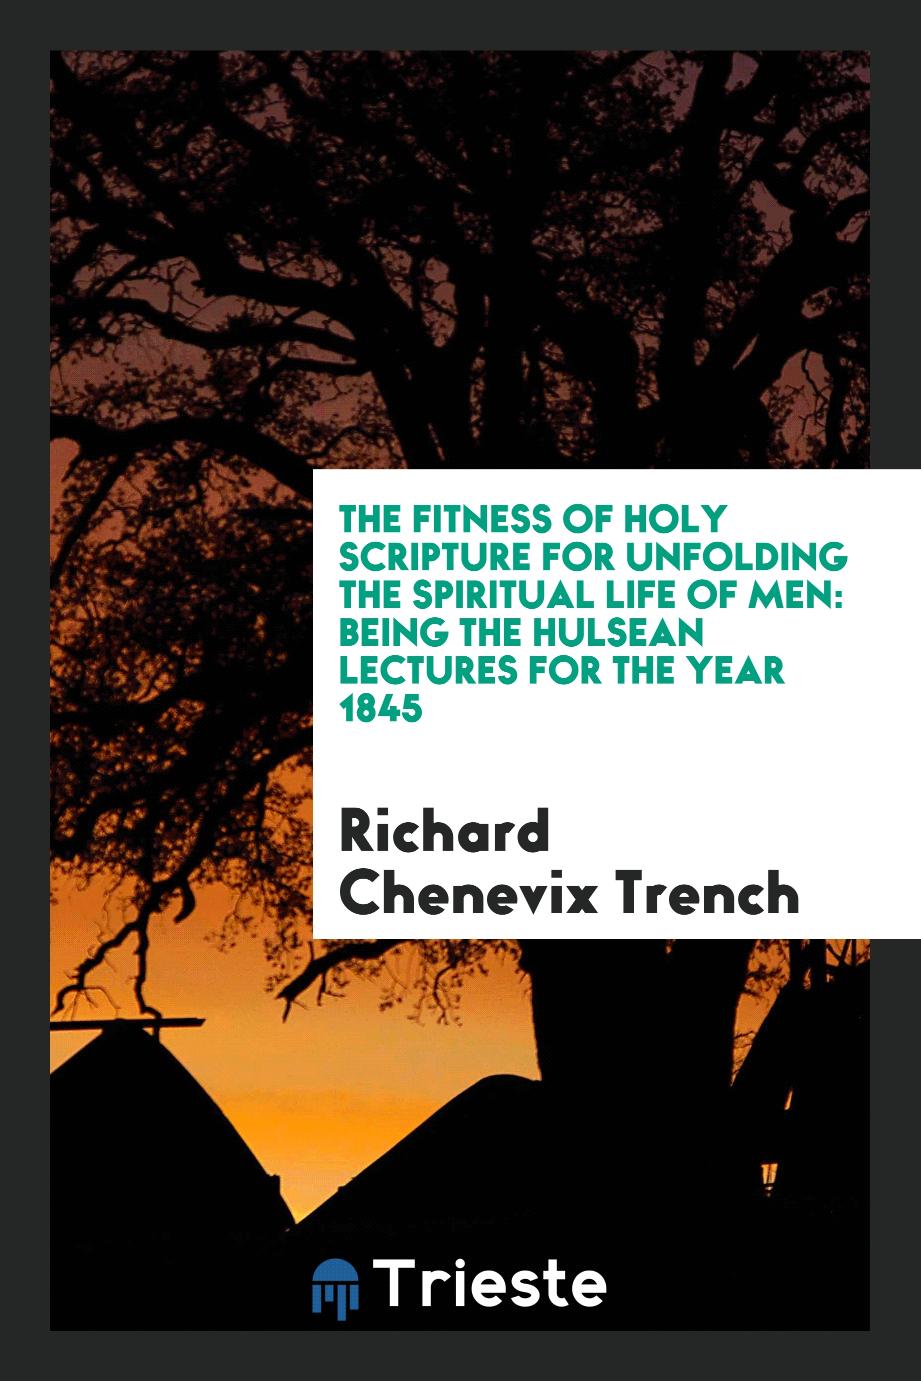 Richard Chenevix Trench - The Fitness of Holy Scripture for Unfolding the Spiritual Life of Men: Being the Hulsean Lectures for the Year 1845